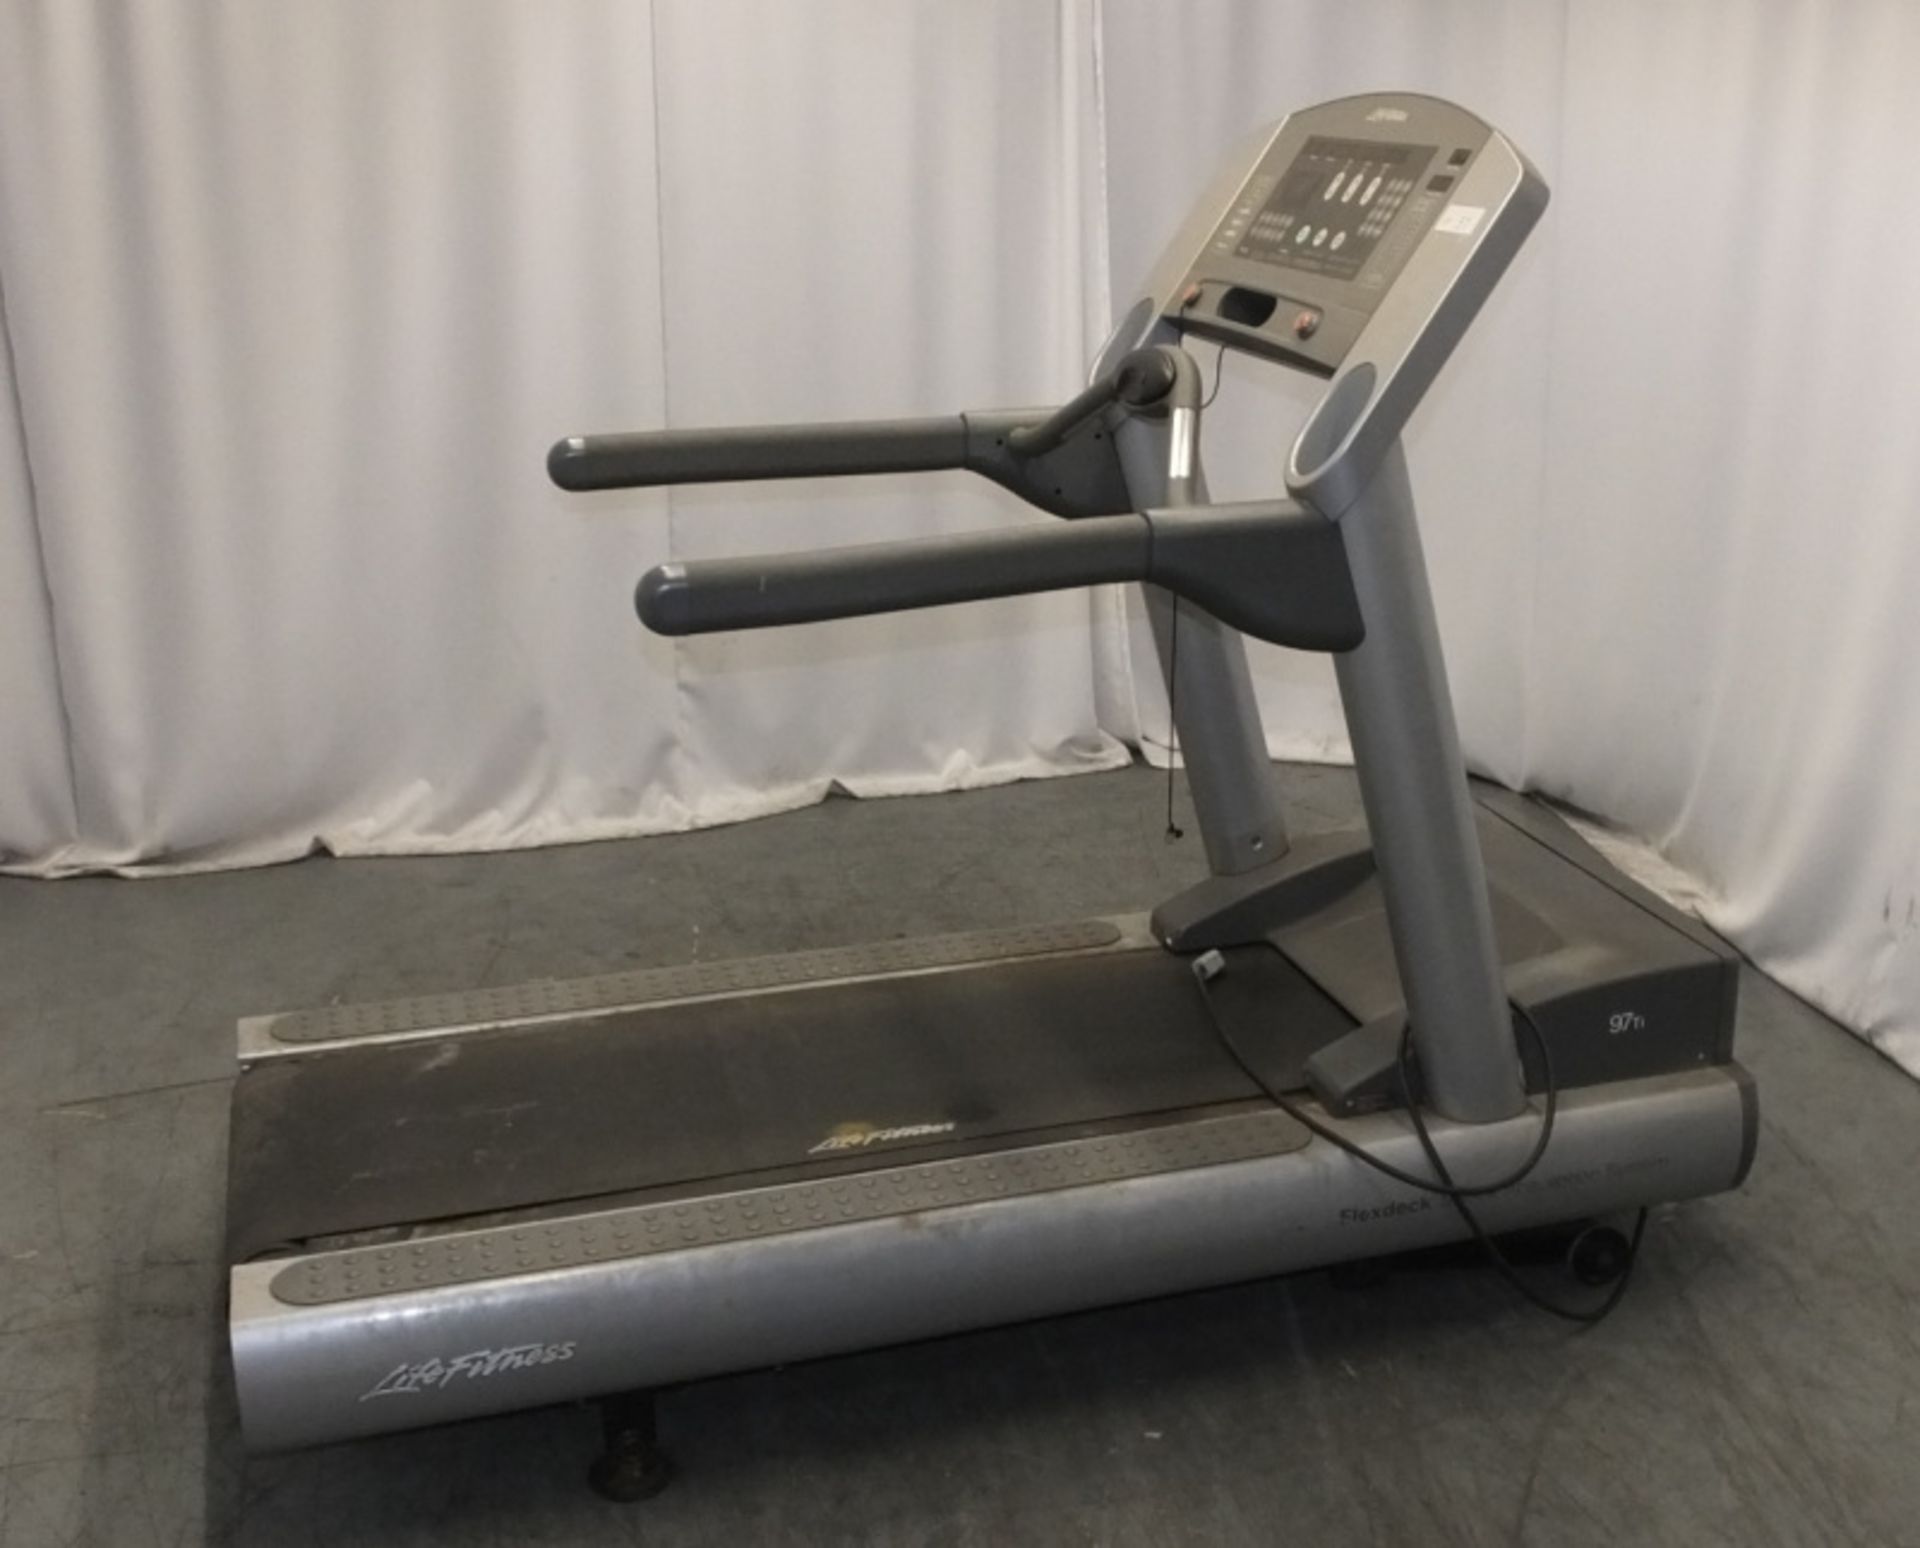 Life Fitness 97Ti Treadmill - Please check pictures for condition